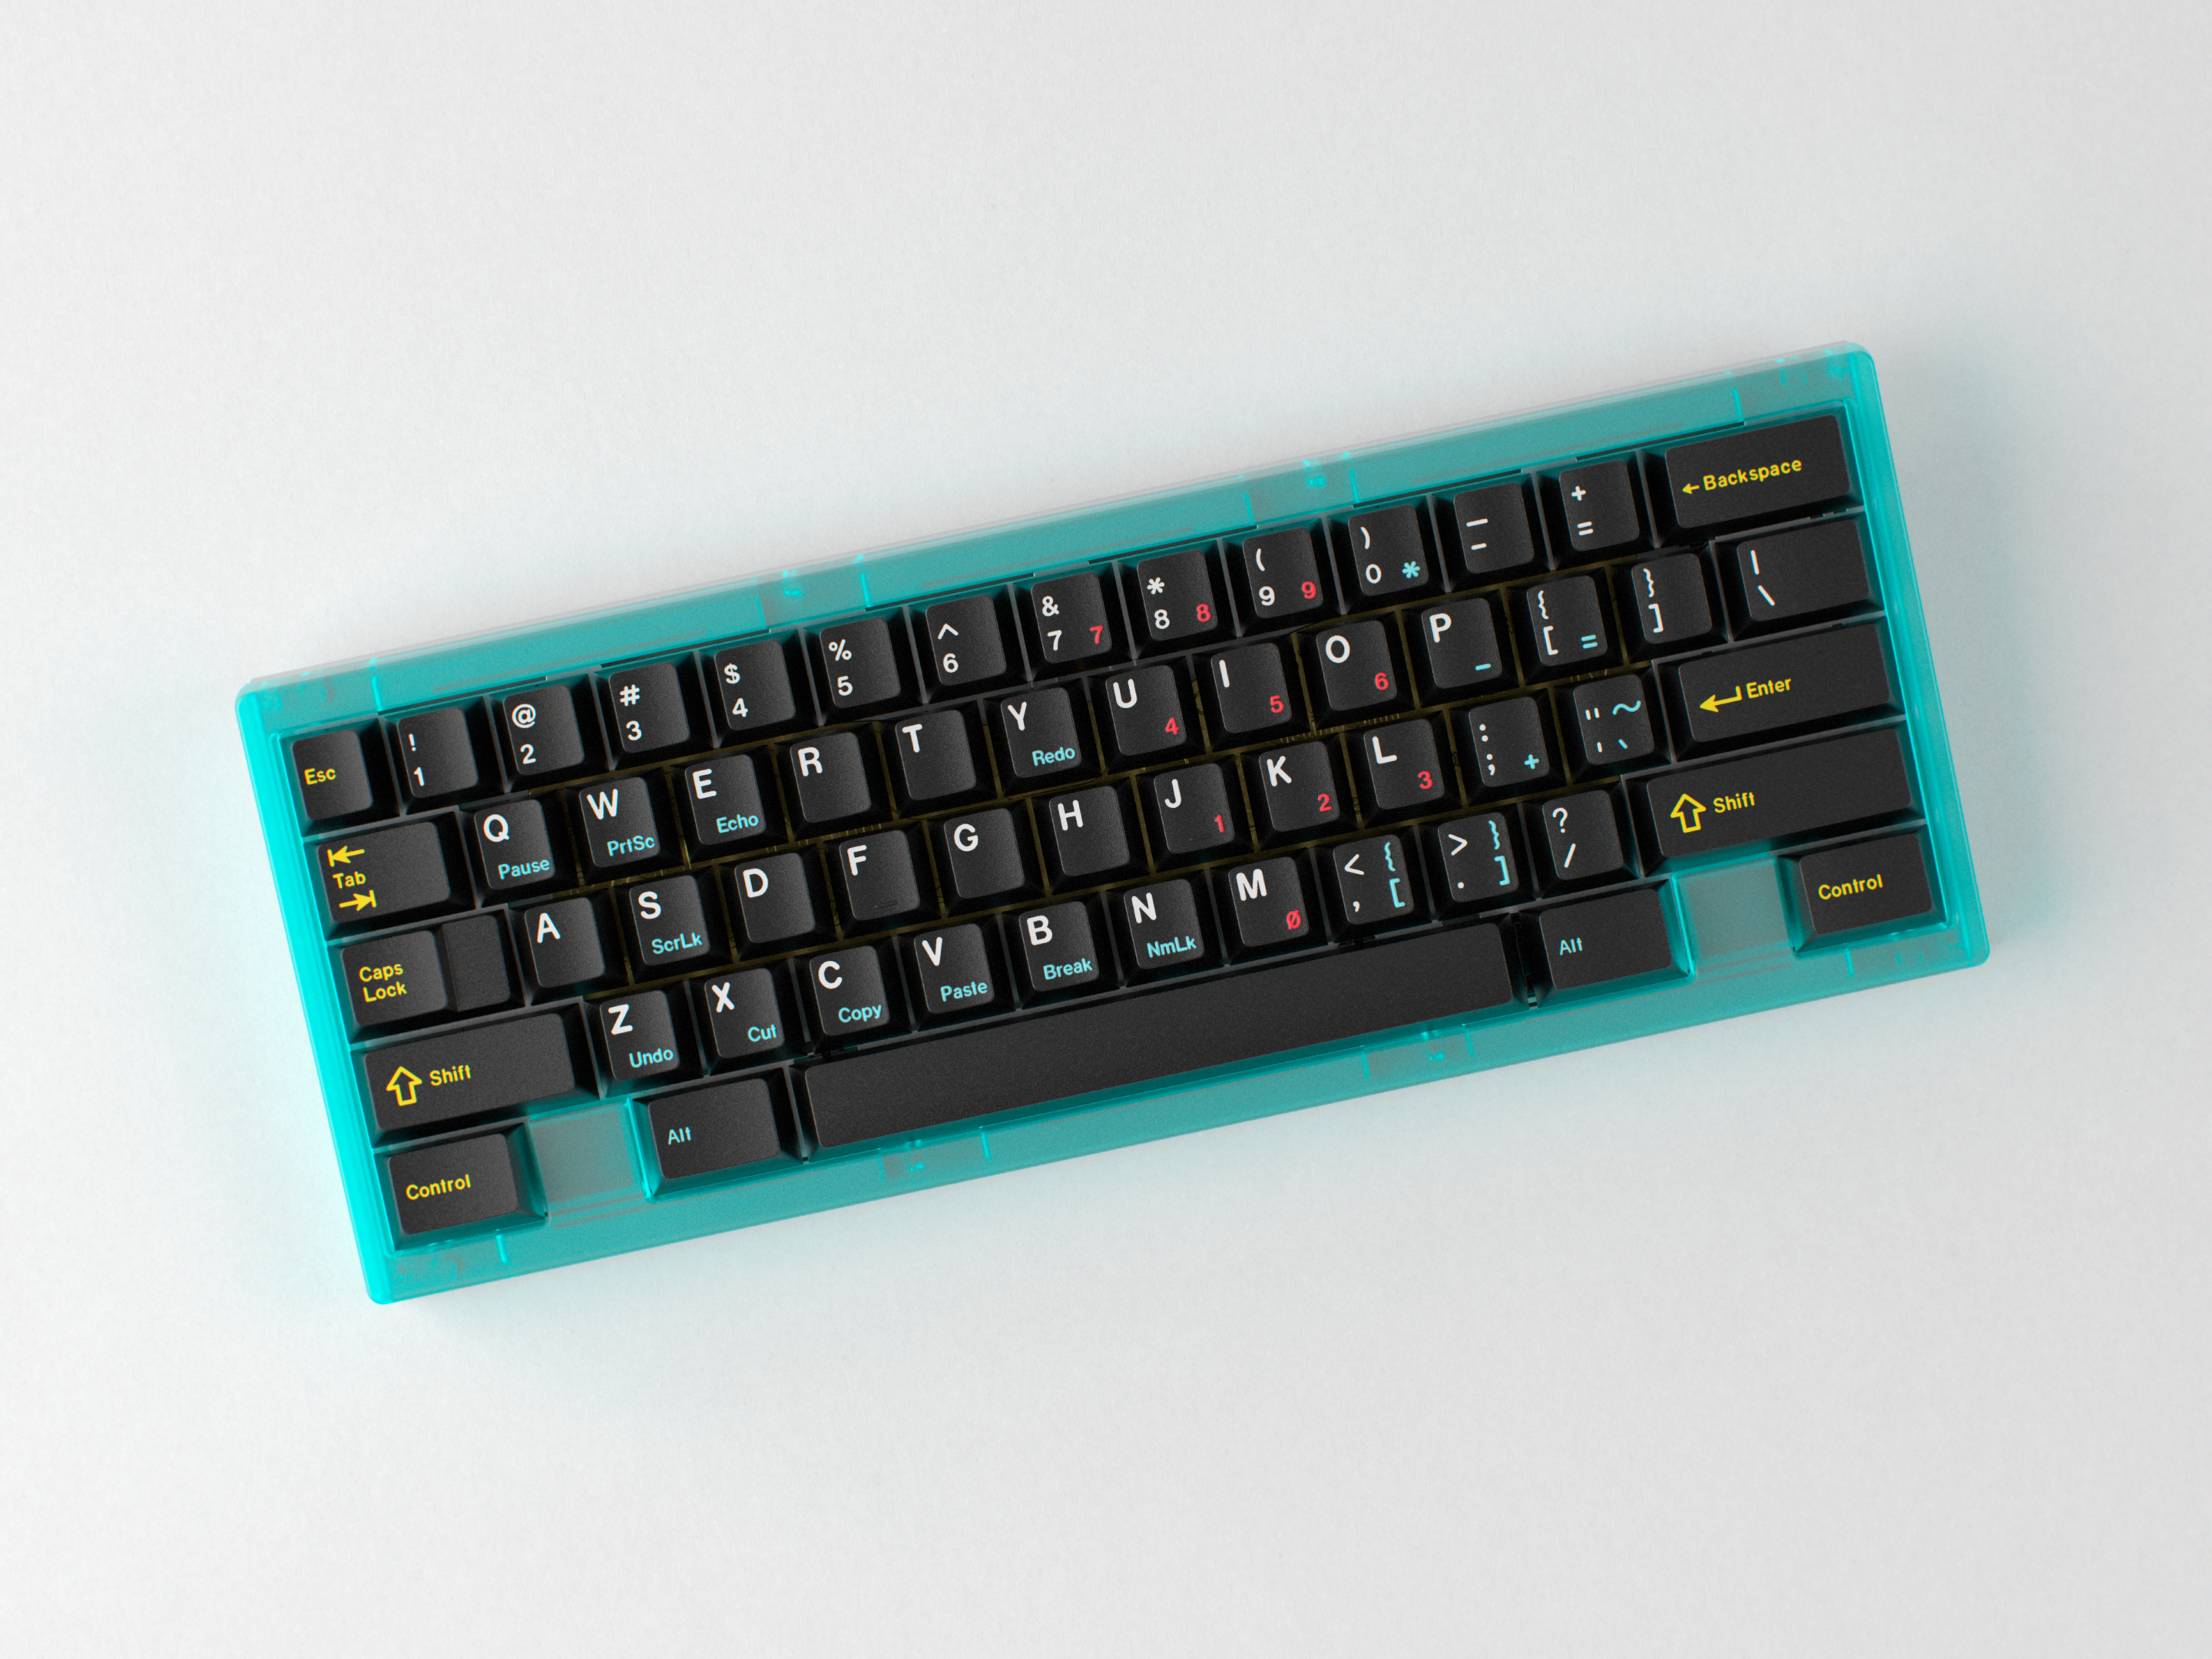 GMK CYL 1520 Keycaps [Group Buy]